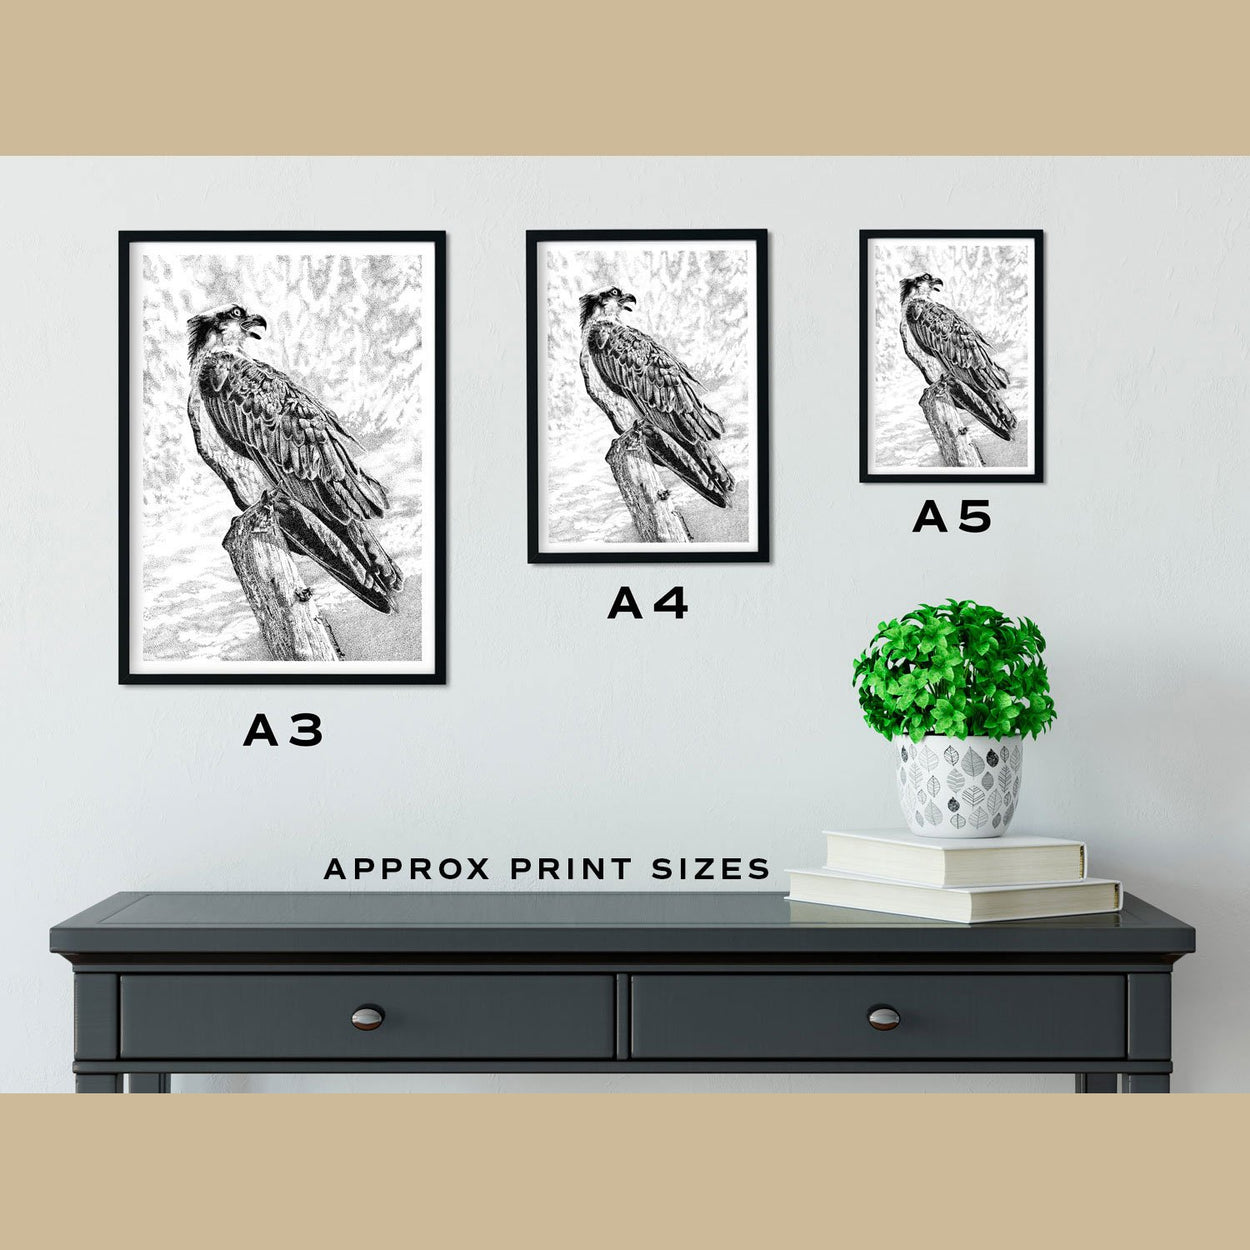 Osprey Prints Size Comparison - The Thriving Wild